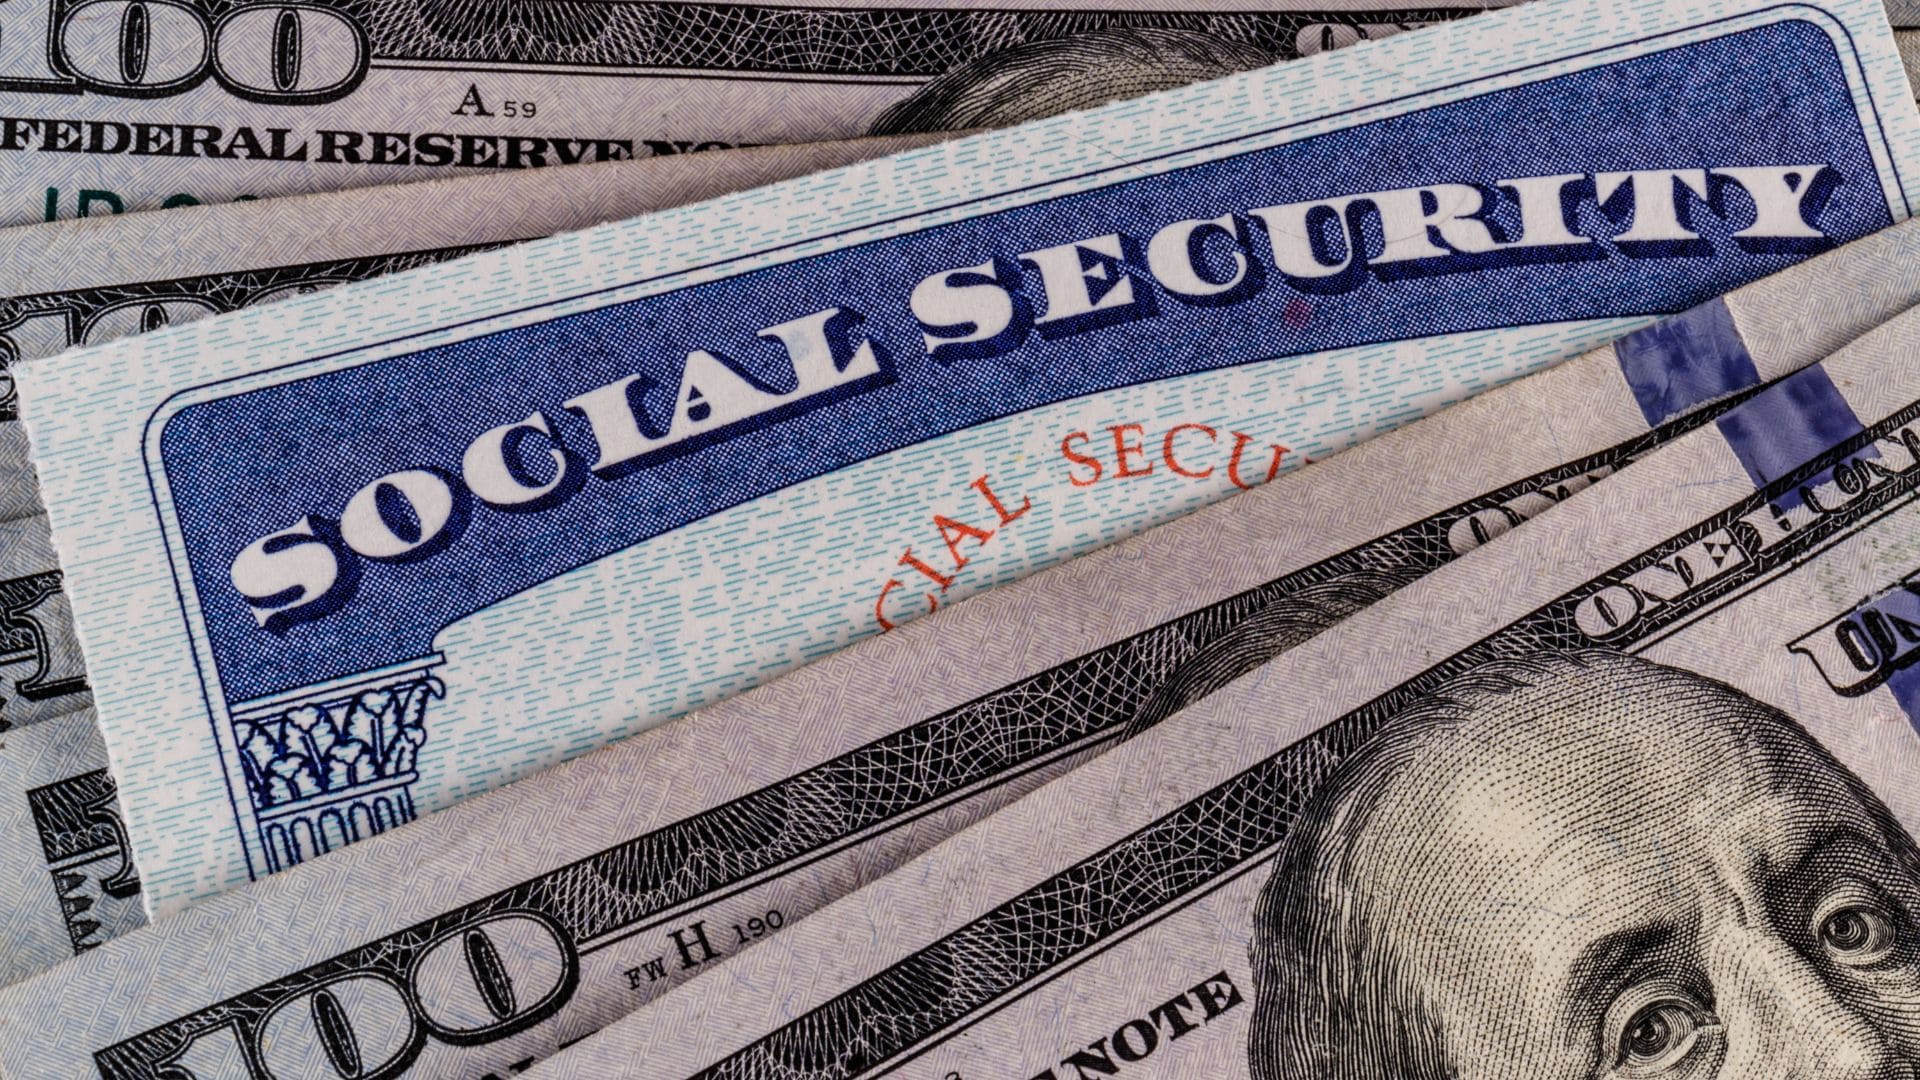 Supplemental Security Income is arriving soon to these Americans